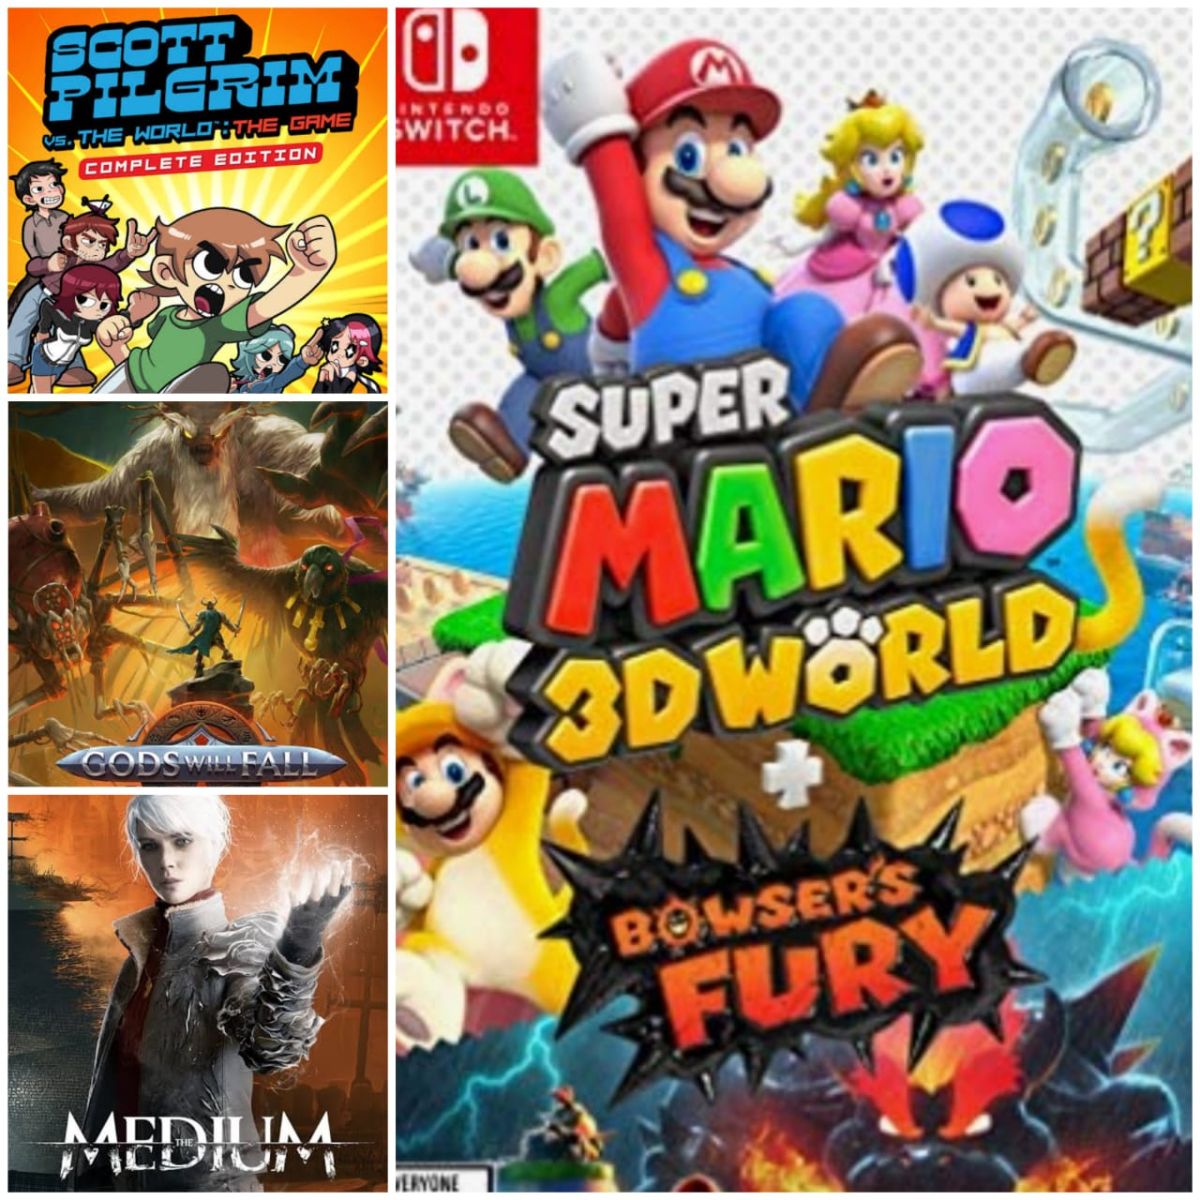 Review: Super Mario 3D World + Bowser’s Fury, The Medium, Gods Will Fall and Scott Pilgrim vs.  The World: The Game – Complete Edition